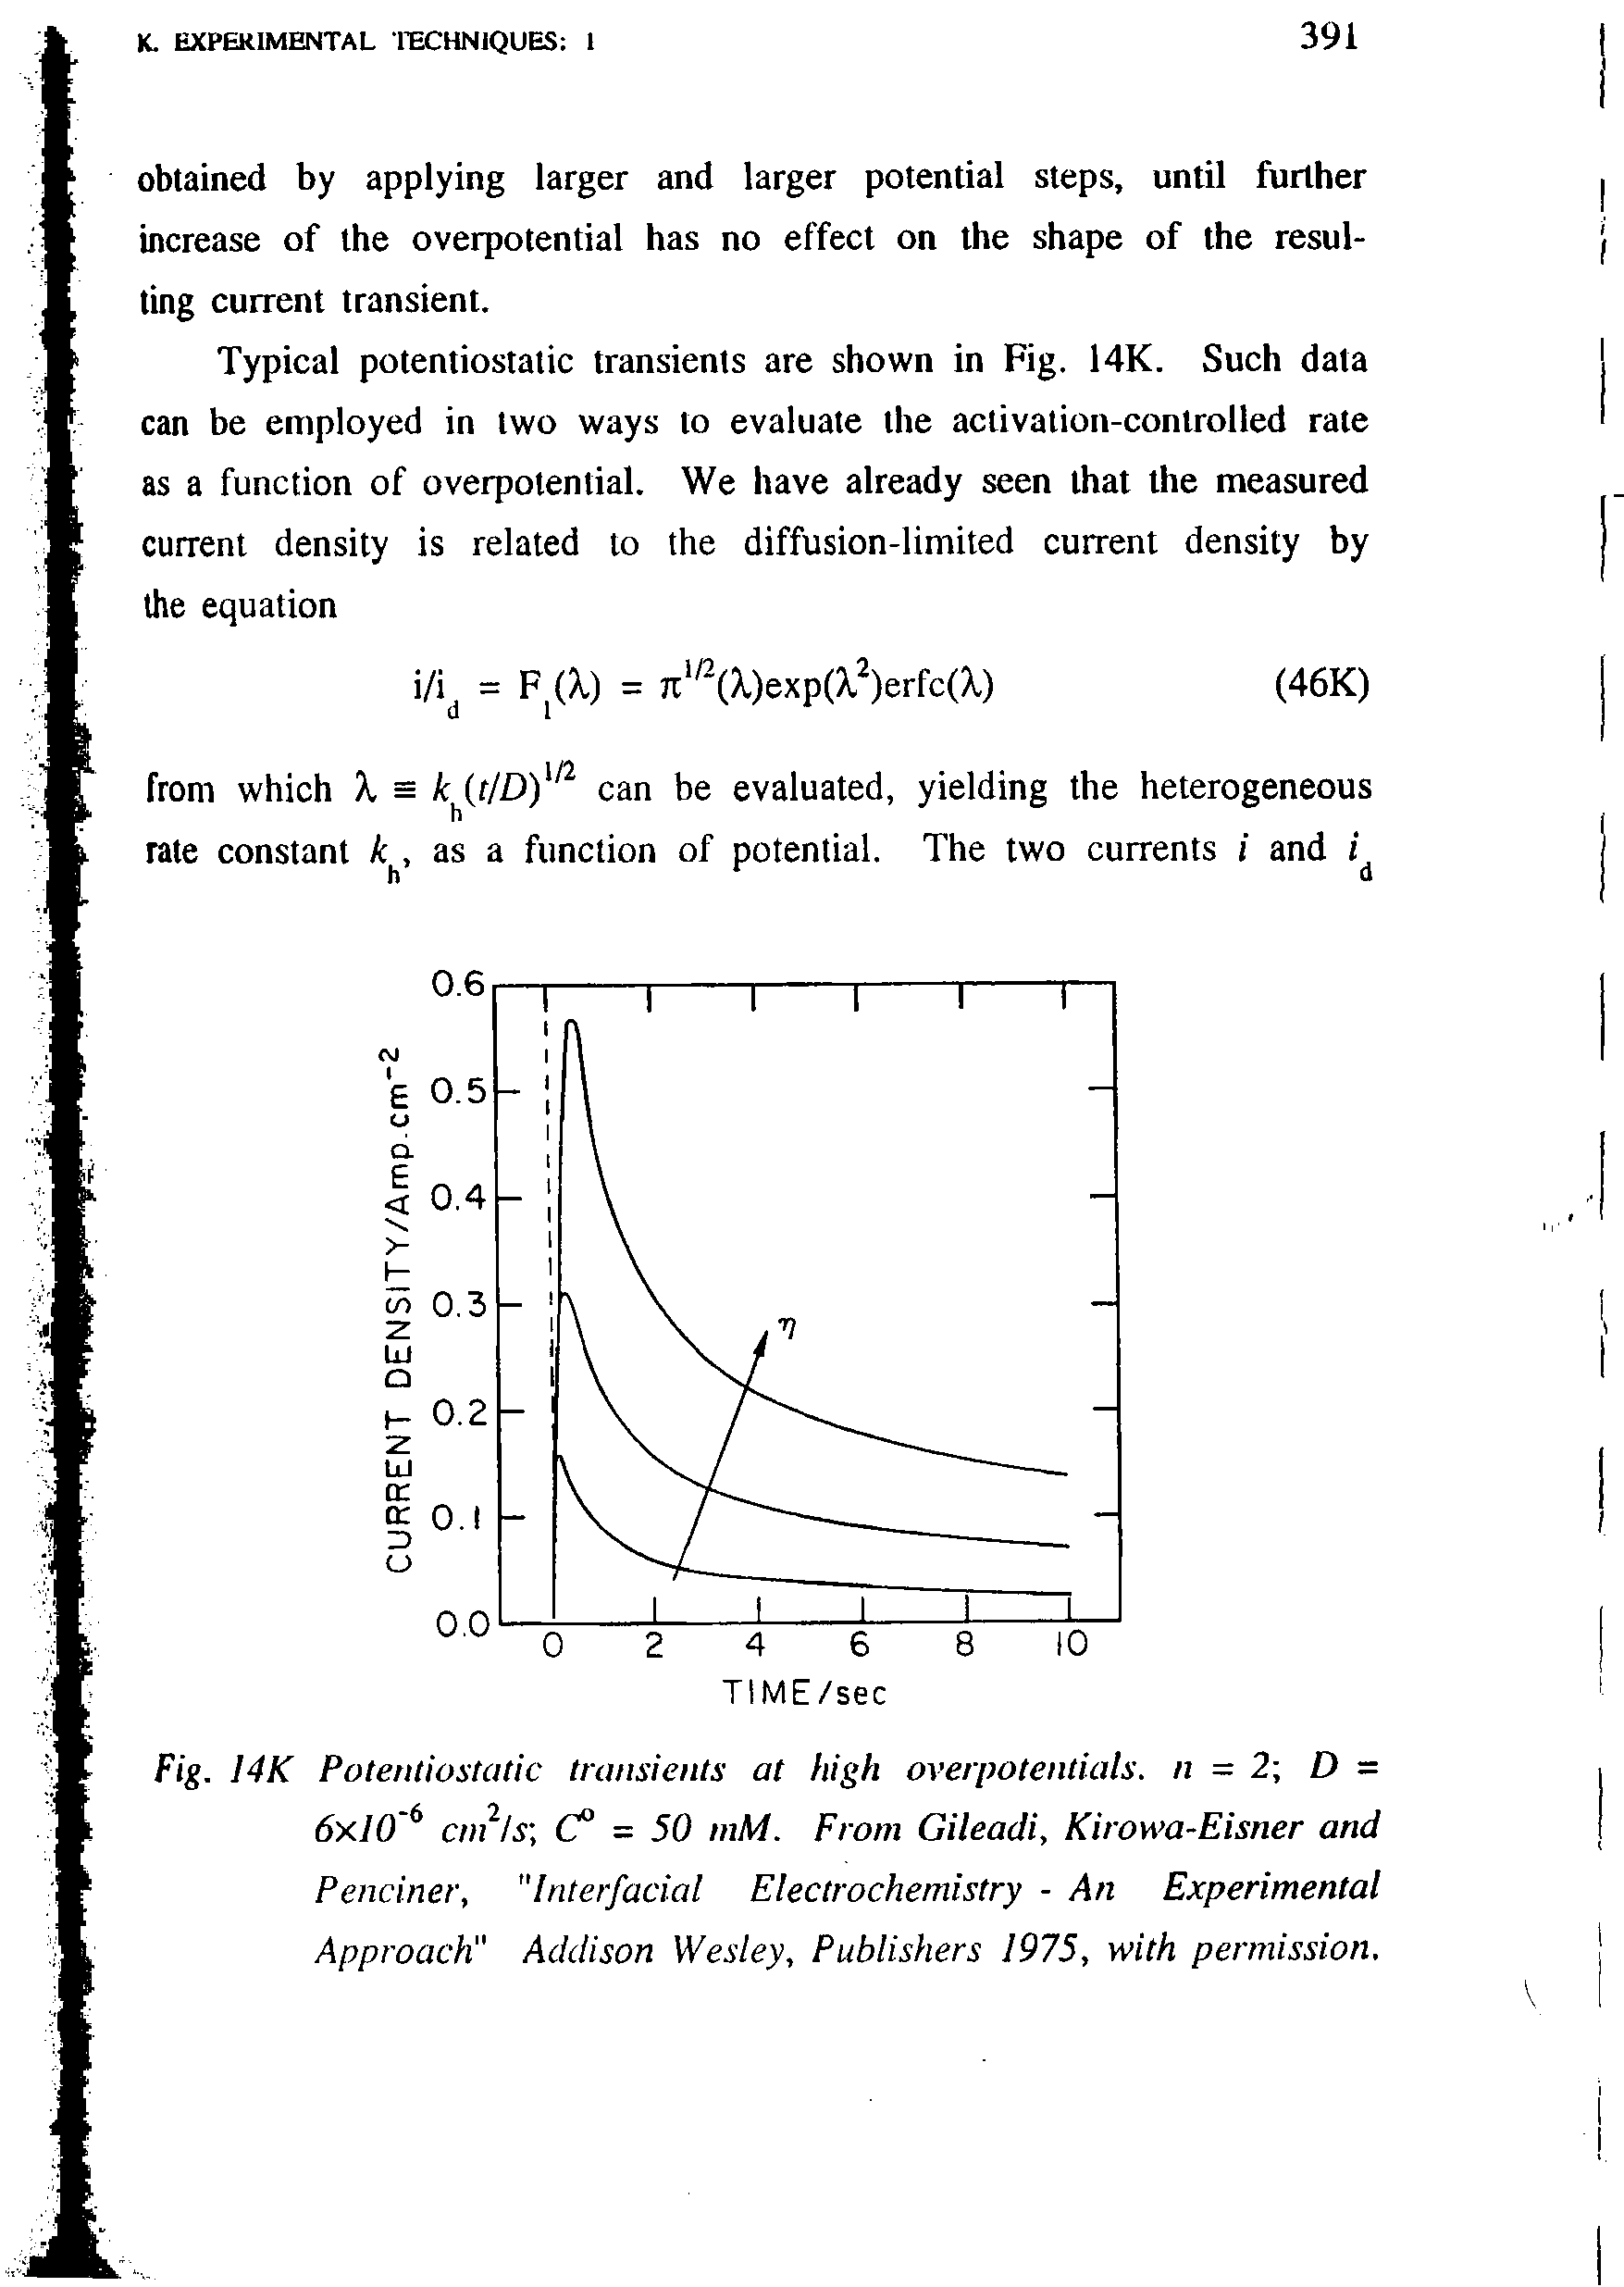 Fig. I4K Potentiostatic transients at high overpotentials, n = 2 D = 6x10 cn s (f = 50 niM. From Gileadi, Kirowa-Eisner and Penciner, "Interfacial Electrochemistry - An Experimental Approach" Addison Wesley, Publishers 1975, with permission.